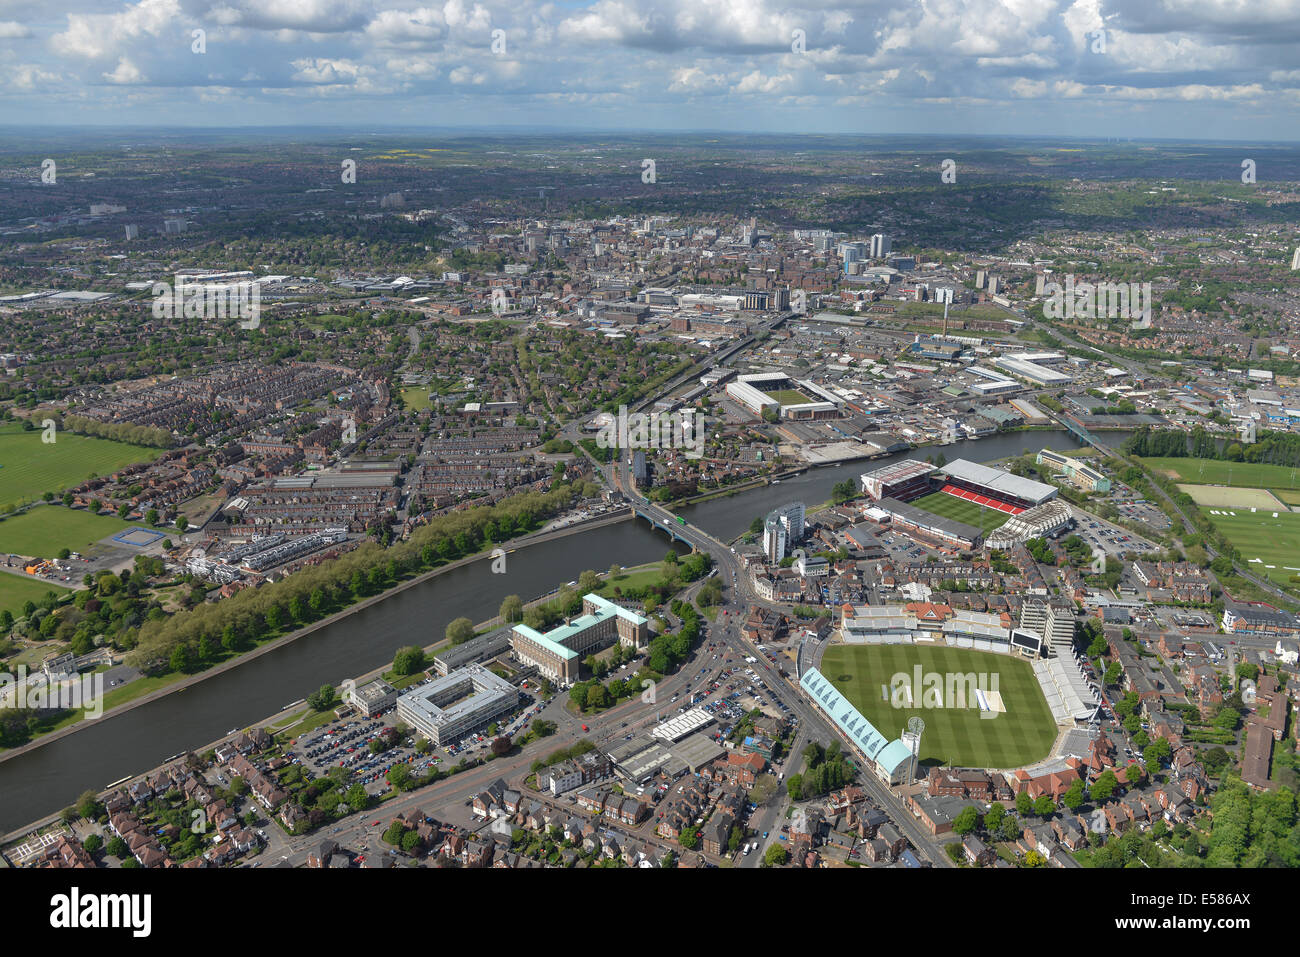 An aerial view looking from Trent Bridge, Nottingham. Both football grounds and the cricket ground visible, city centre behind. Stock Photo